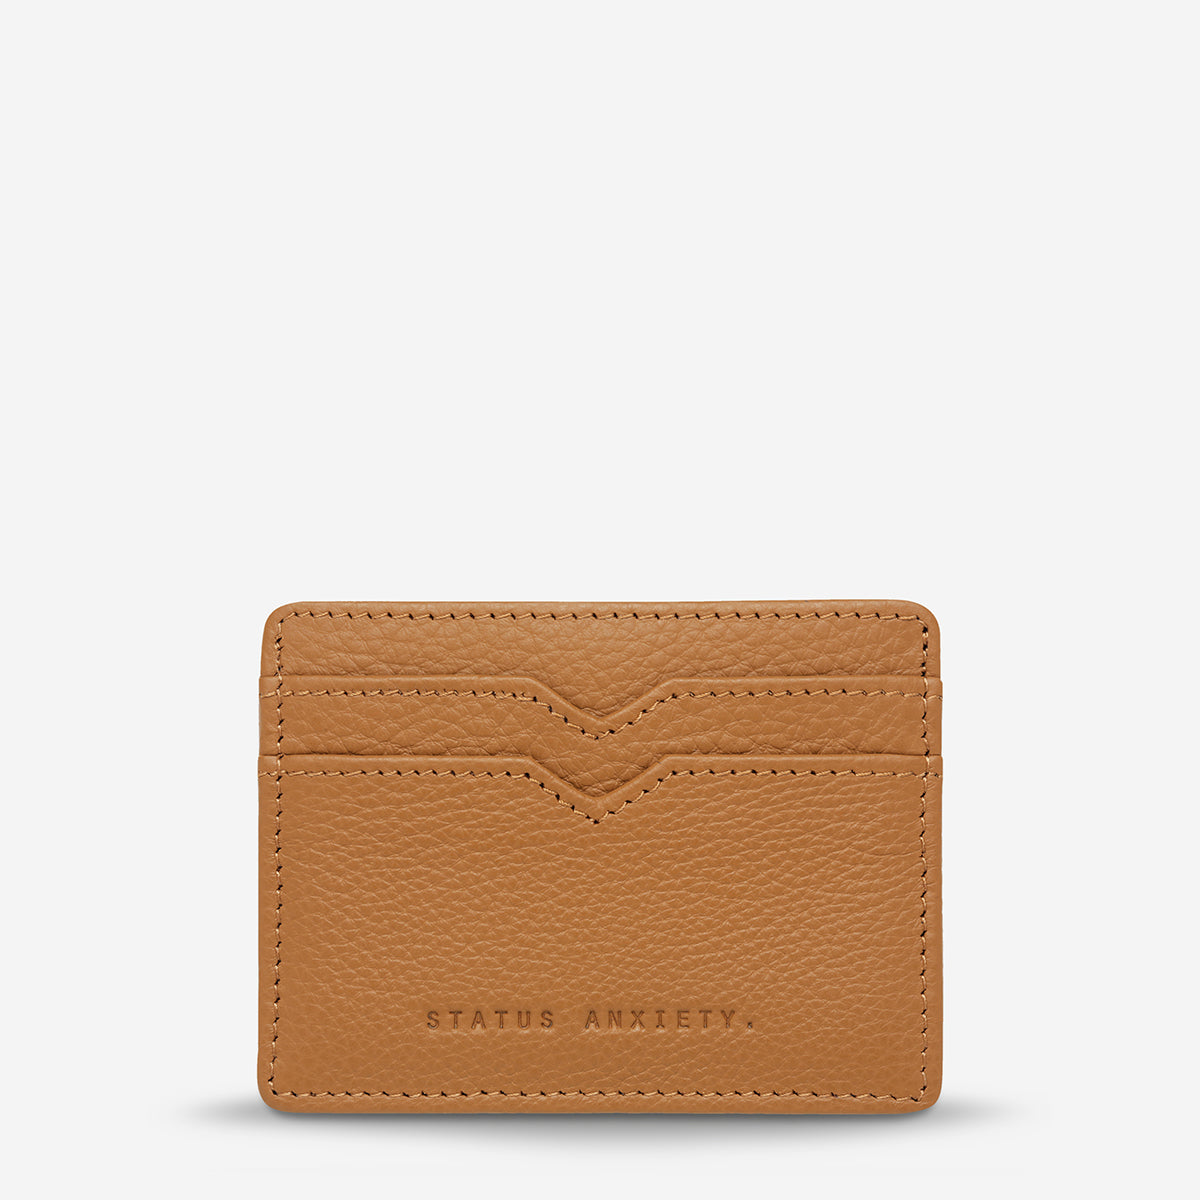 Together For Now Women's Tan Leather Card Wallet - Mandi at Home